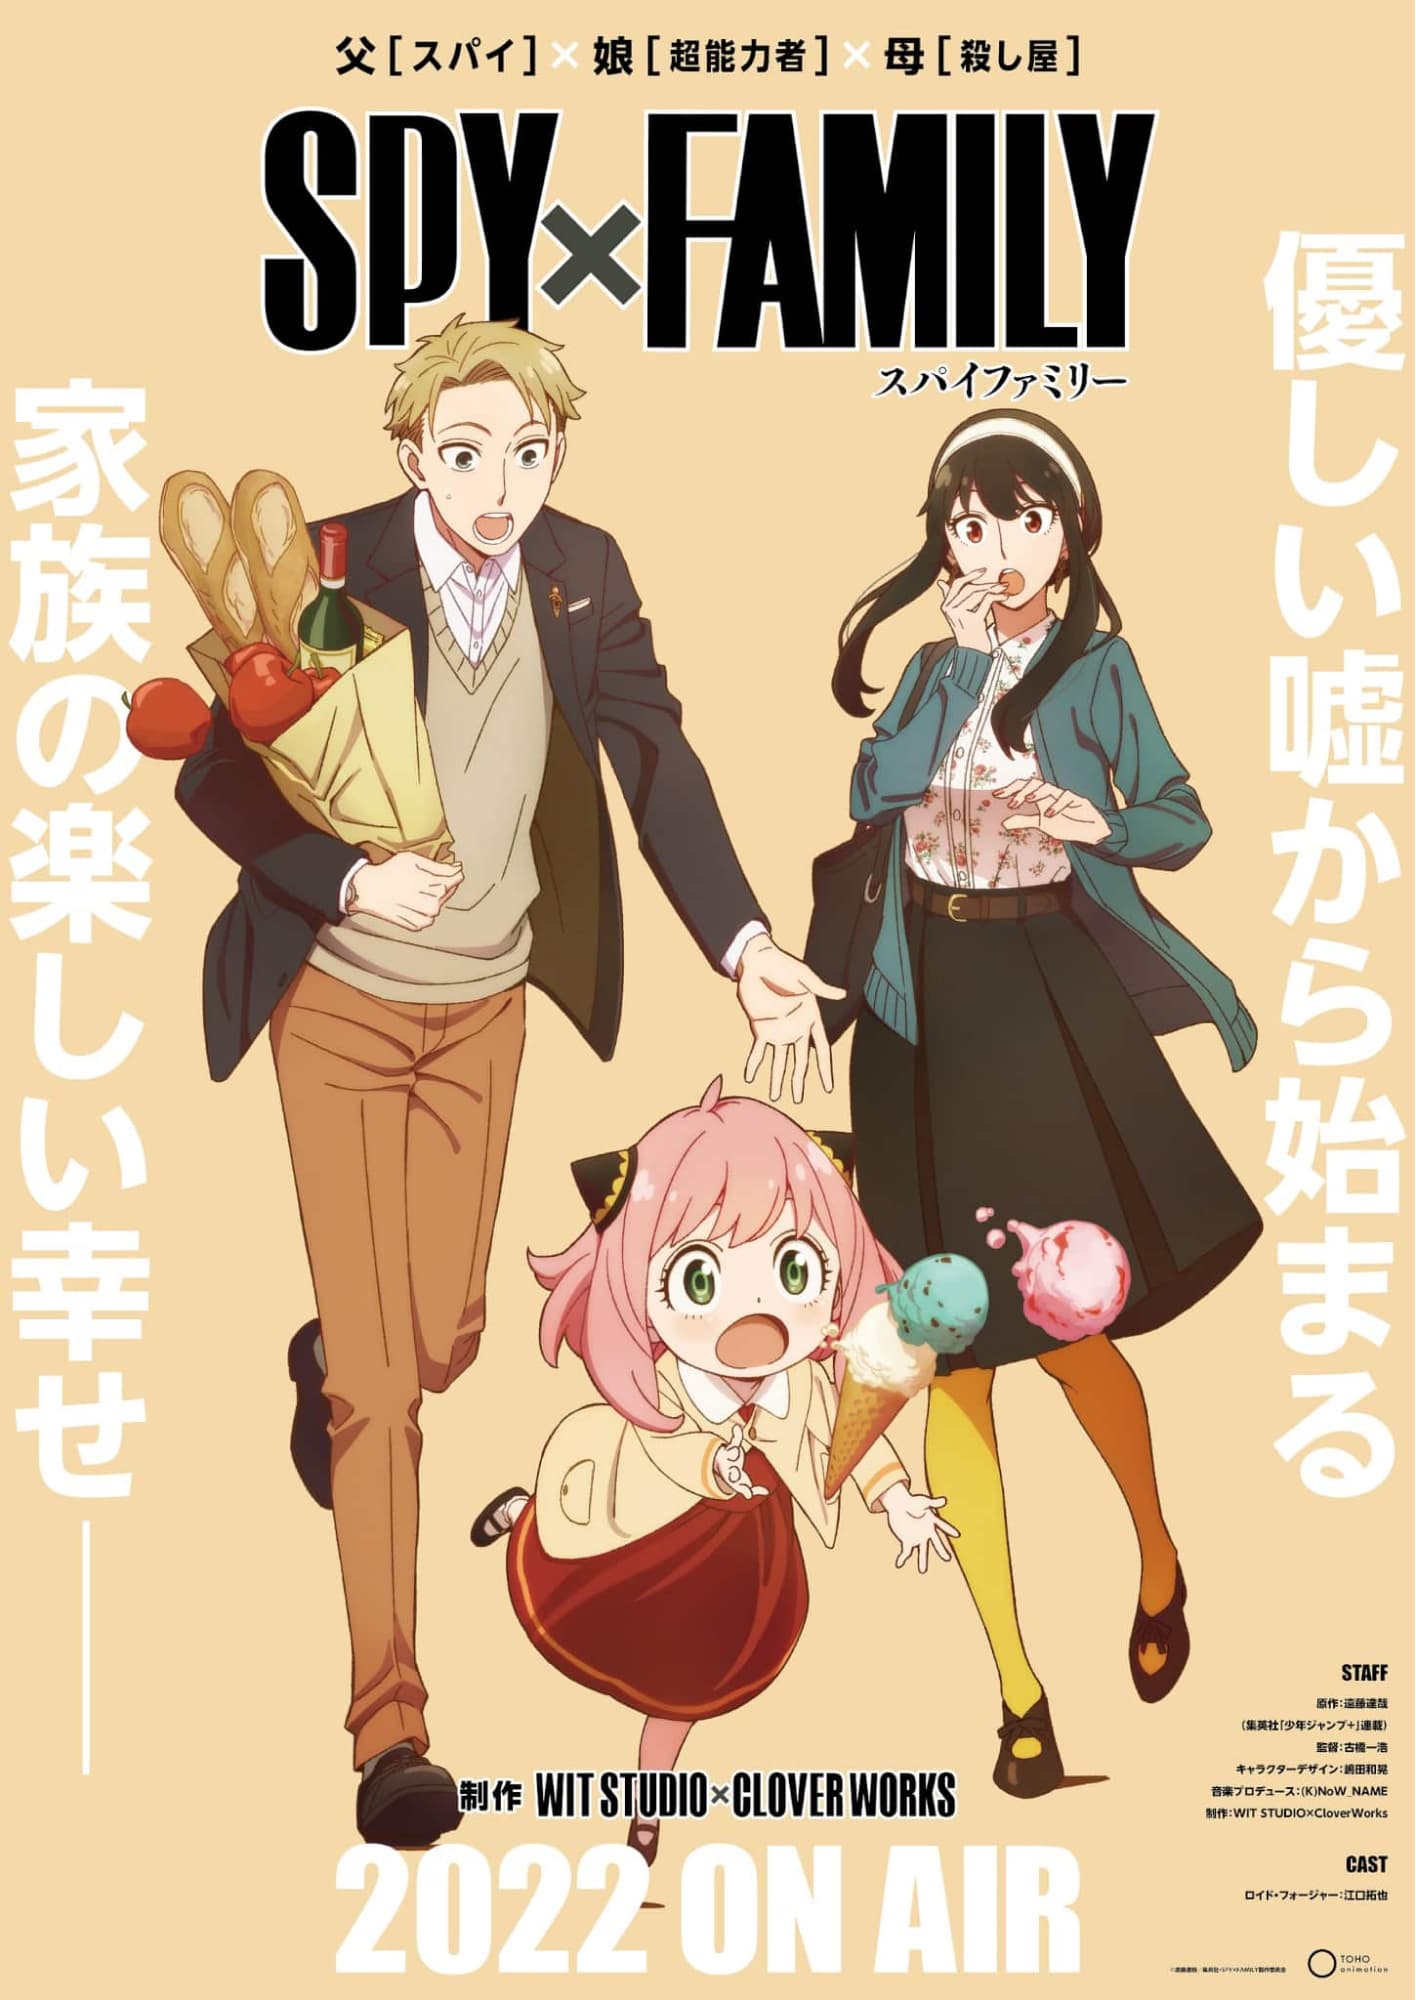 cover scan manga spyxfamily